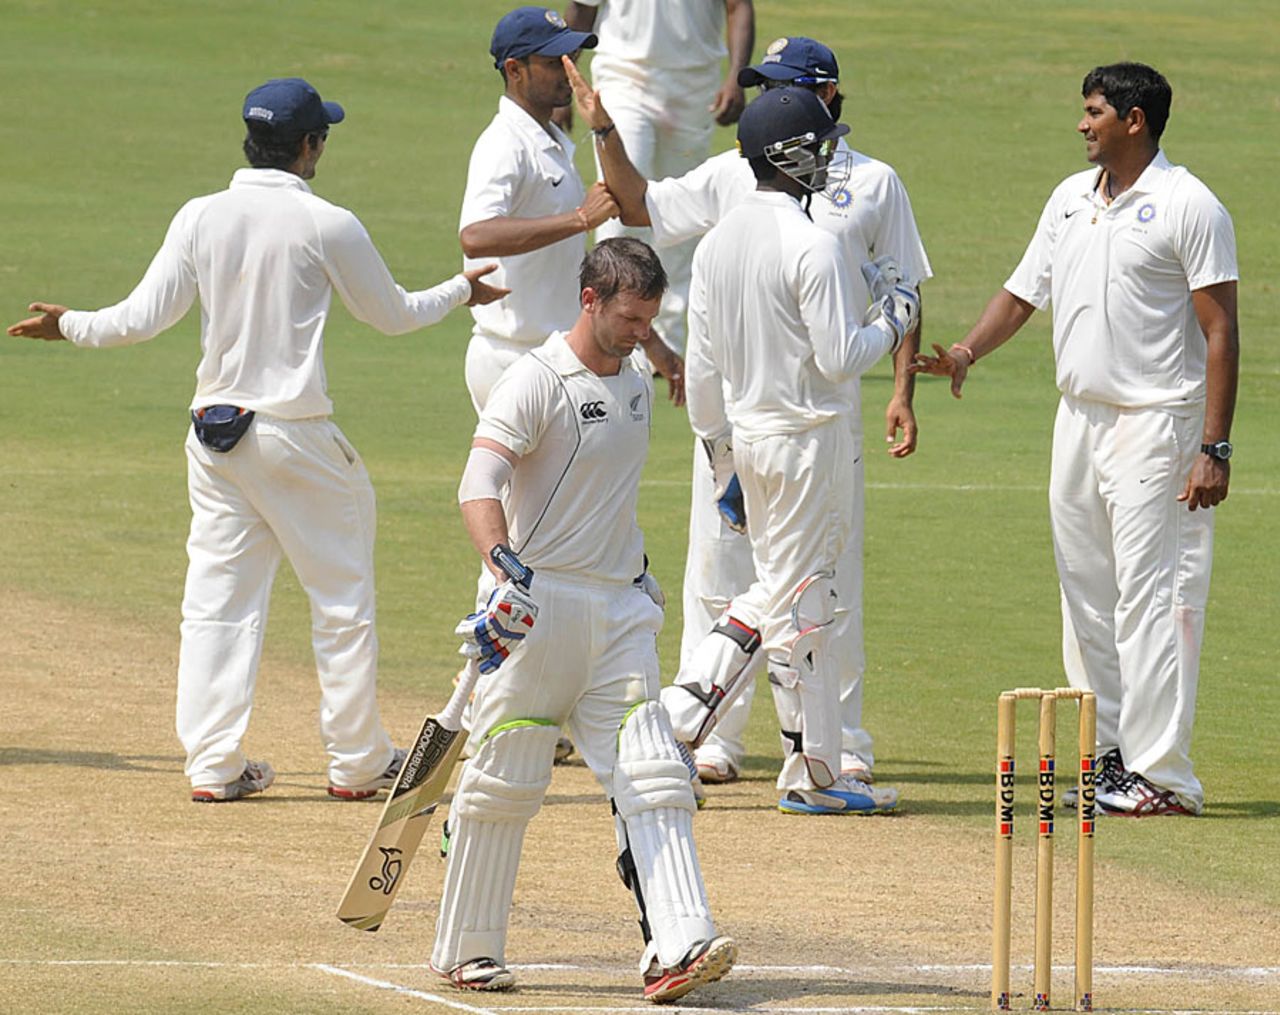 India A celebrate the wicket of Carl Cachopa, India A v New Zealand A, 2nd unofficial Test, 4th day, Visakhapatnam, September 5, 2013